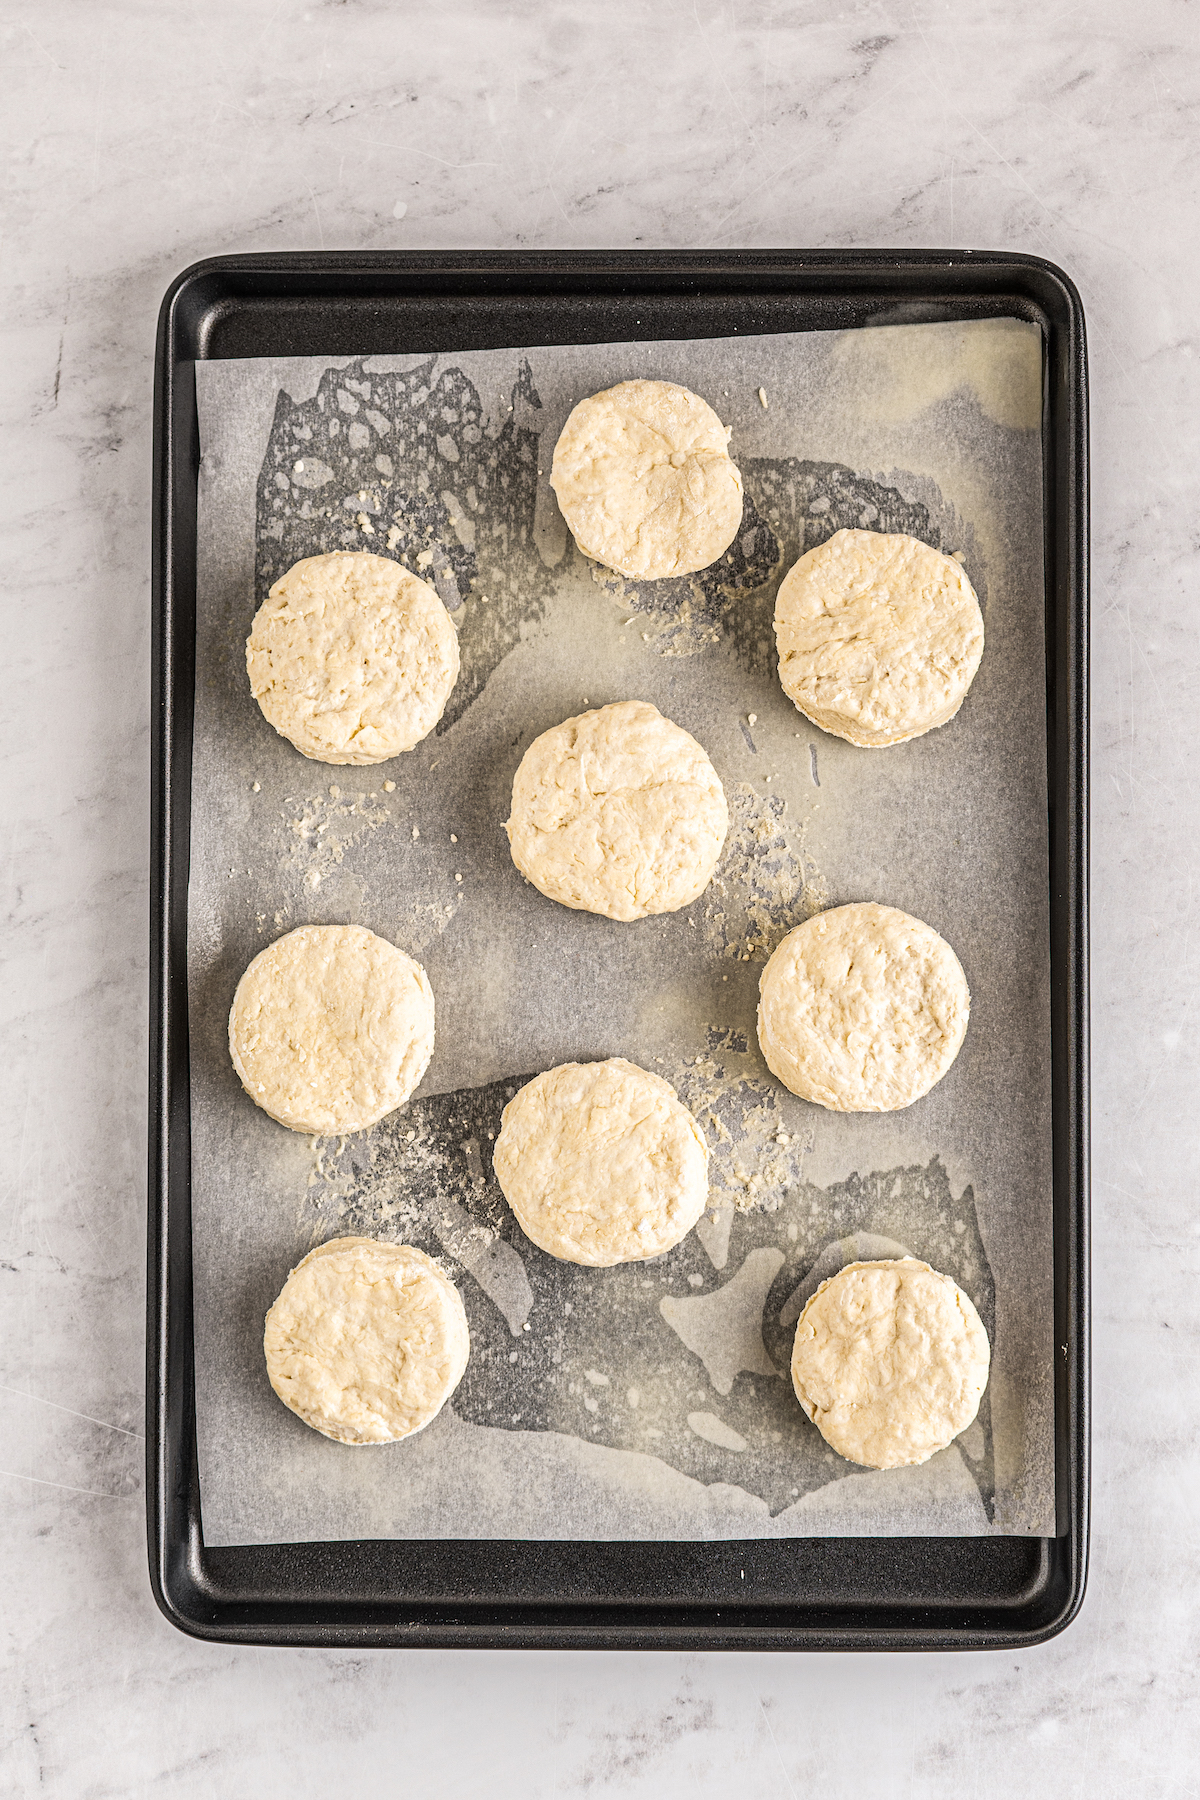 Biscuits arranged on a parchment-lined baking sheet.